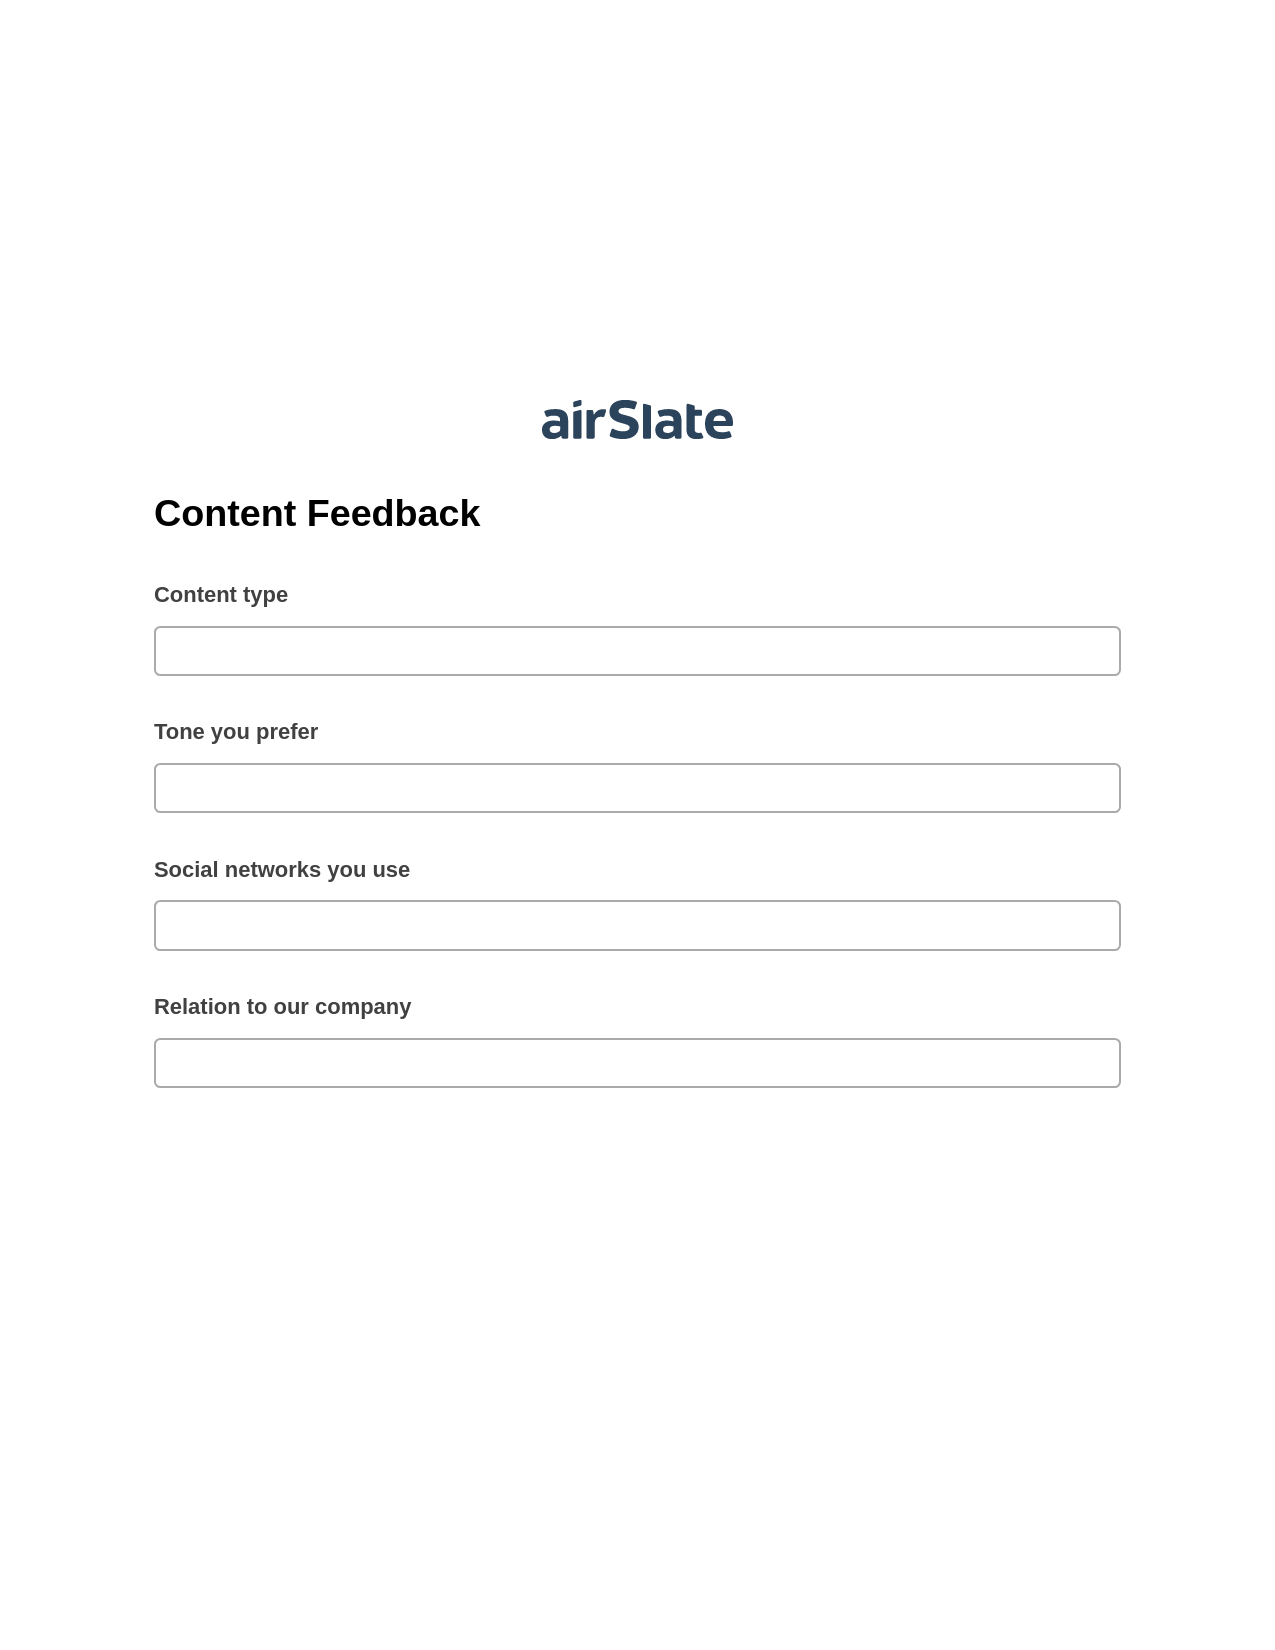 Multirole Content Feedback Pre-fill Dropdown from Airtable, Lock the slate bot, Archive to SharePoint Folder Bot